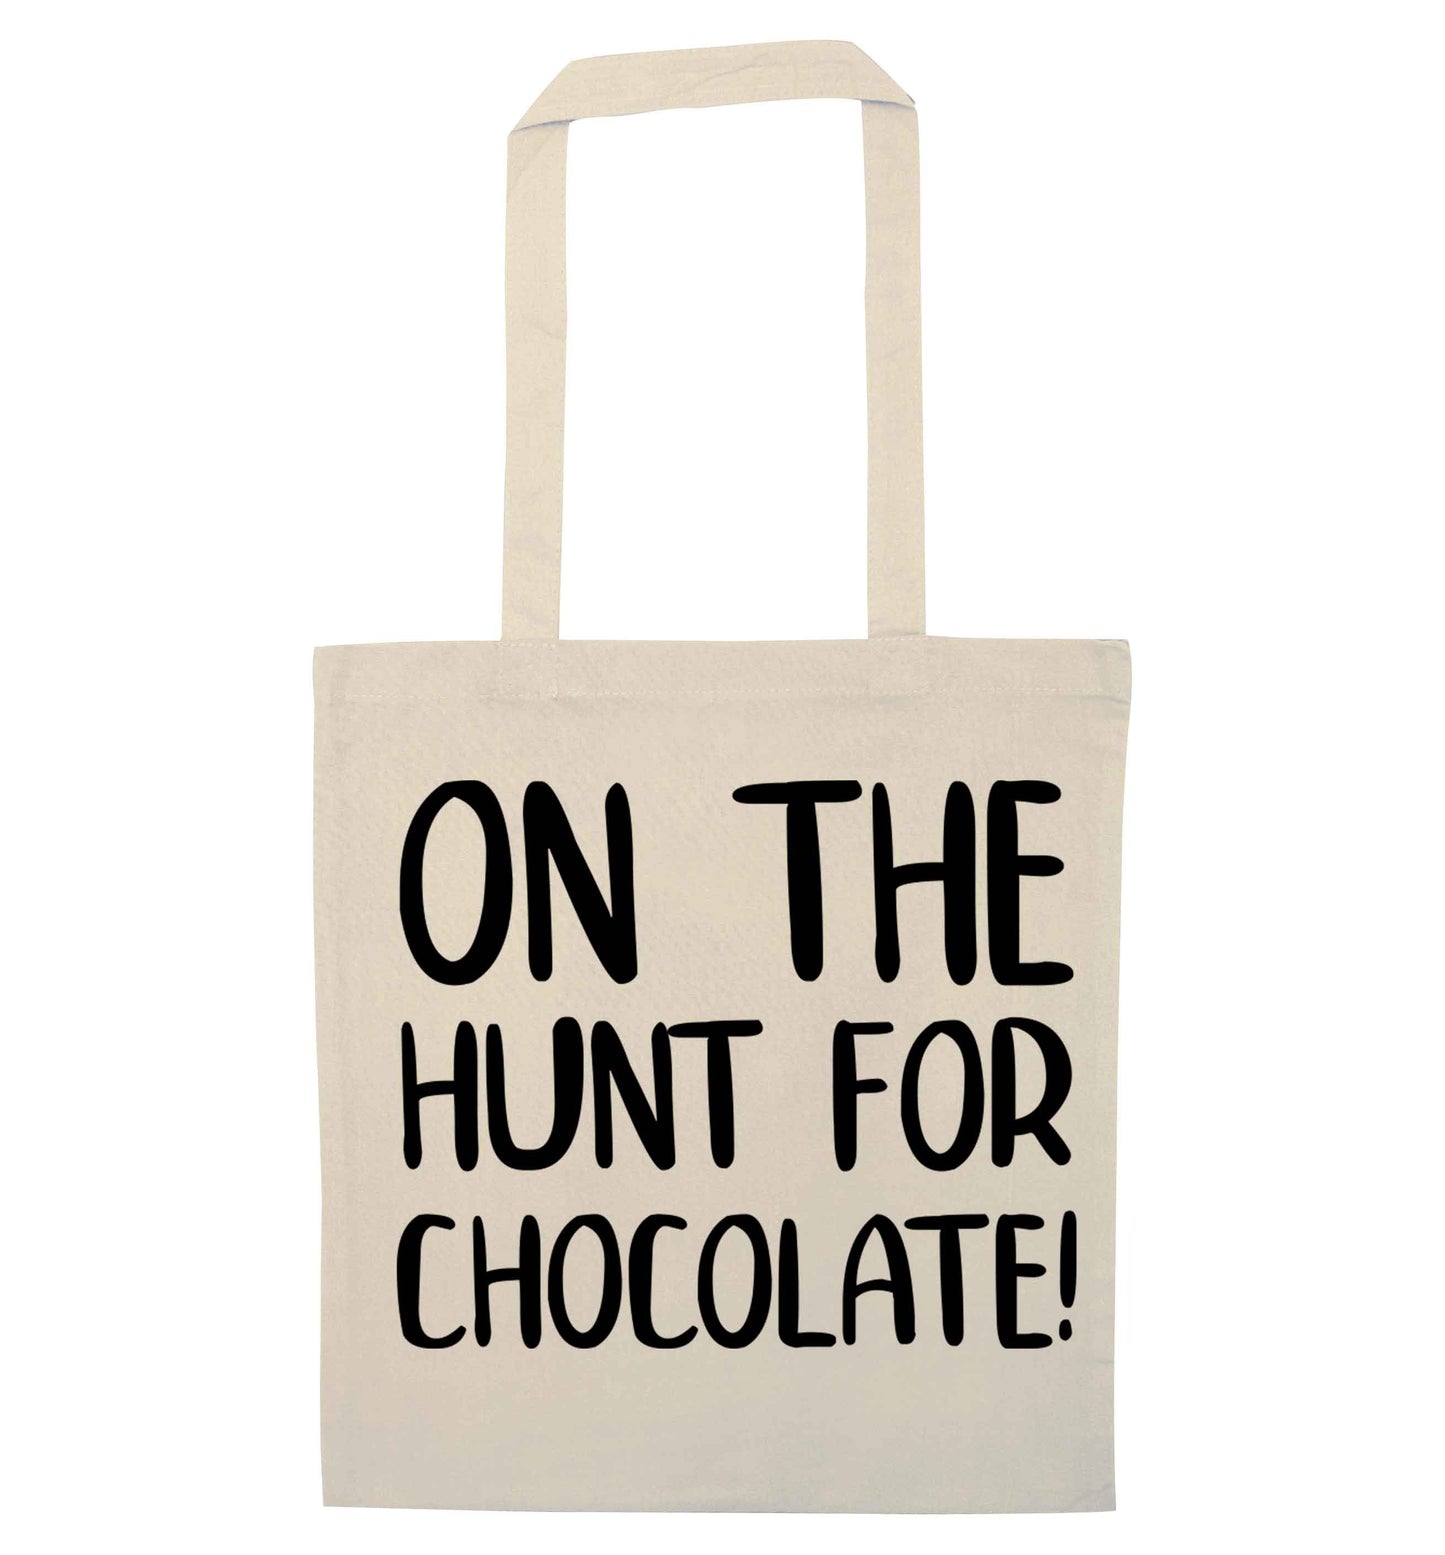 On the hunt for chocolate! natural tote bag